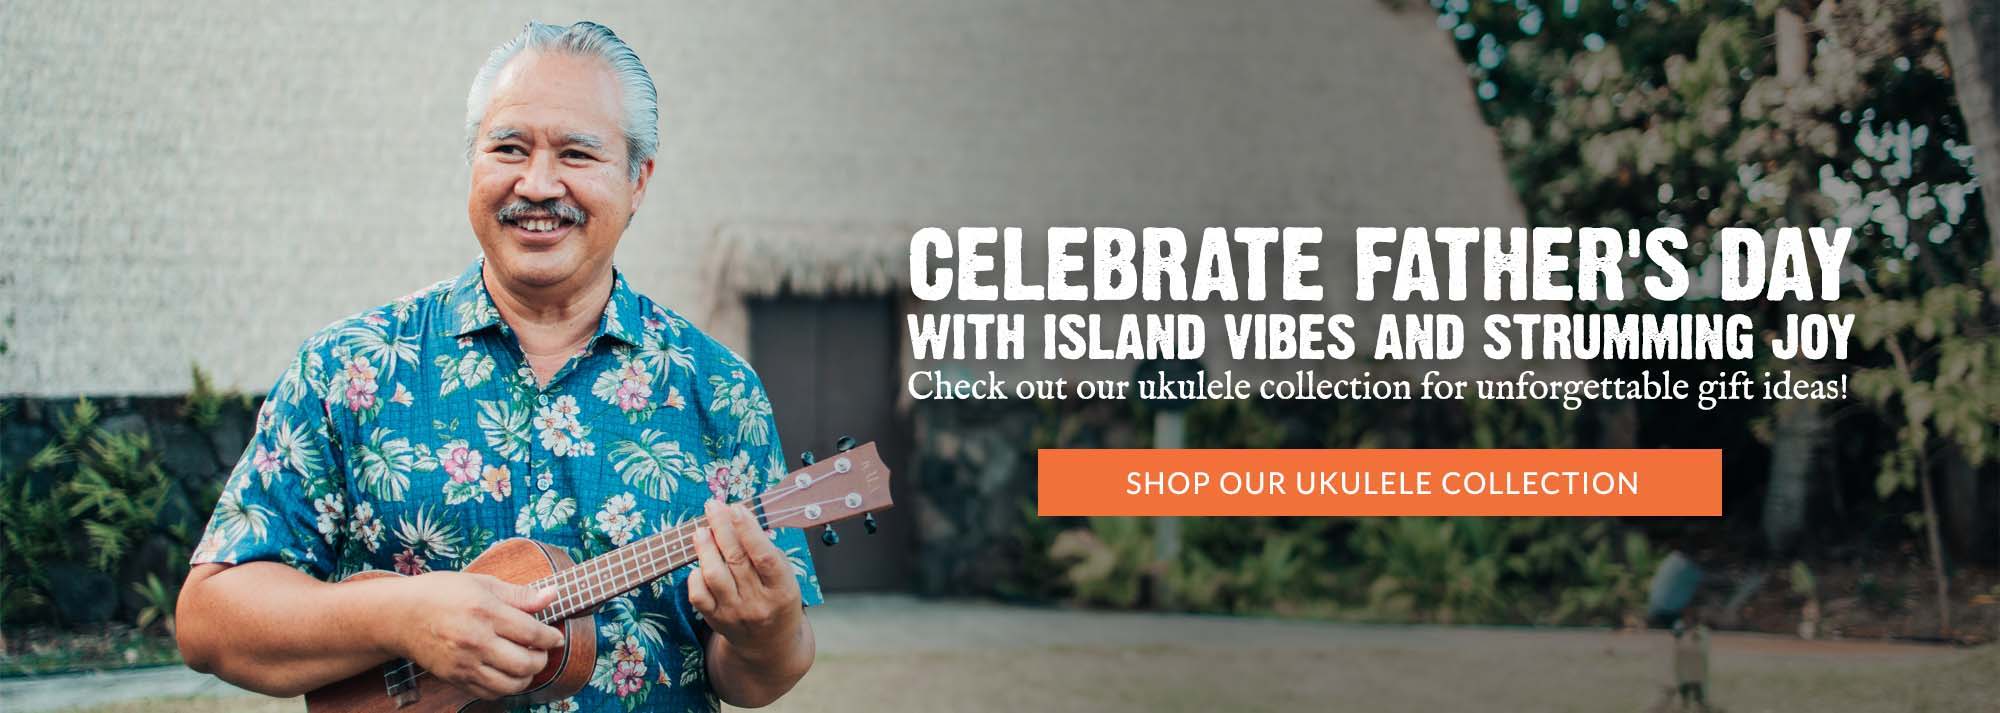 Celebrate Father's Day with island vibes! Explore our ukulele collection for unforgettable gift ideas. Strumming joy awaits!